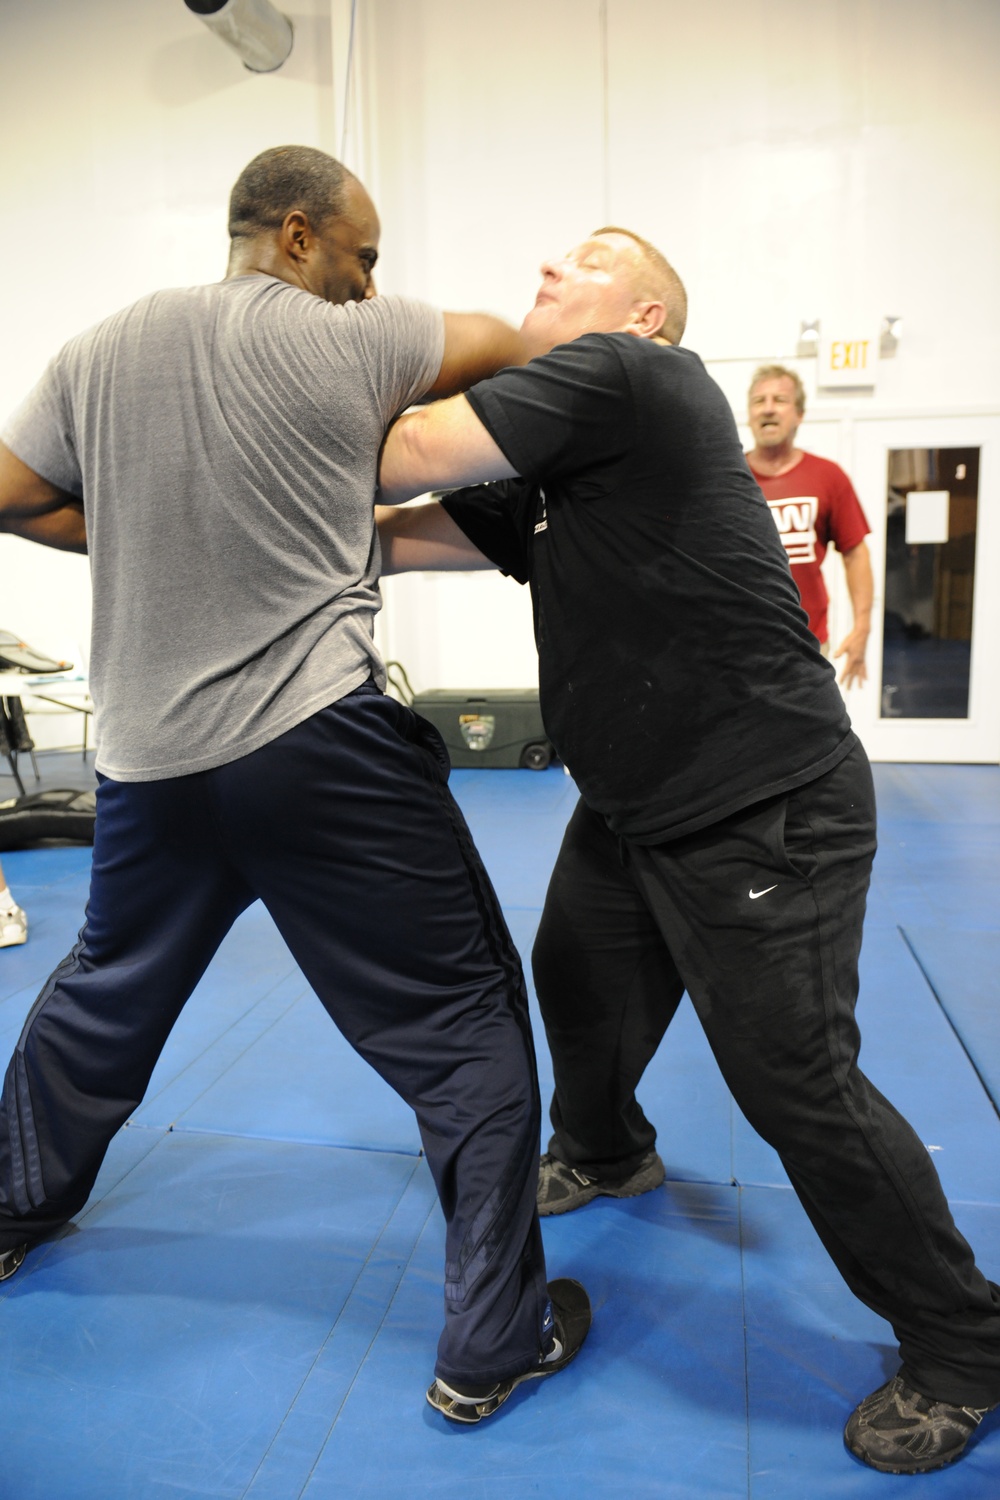 Army South soldiers get a real world lesson in captivity avoidance, Krav Maga style